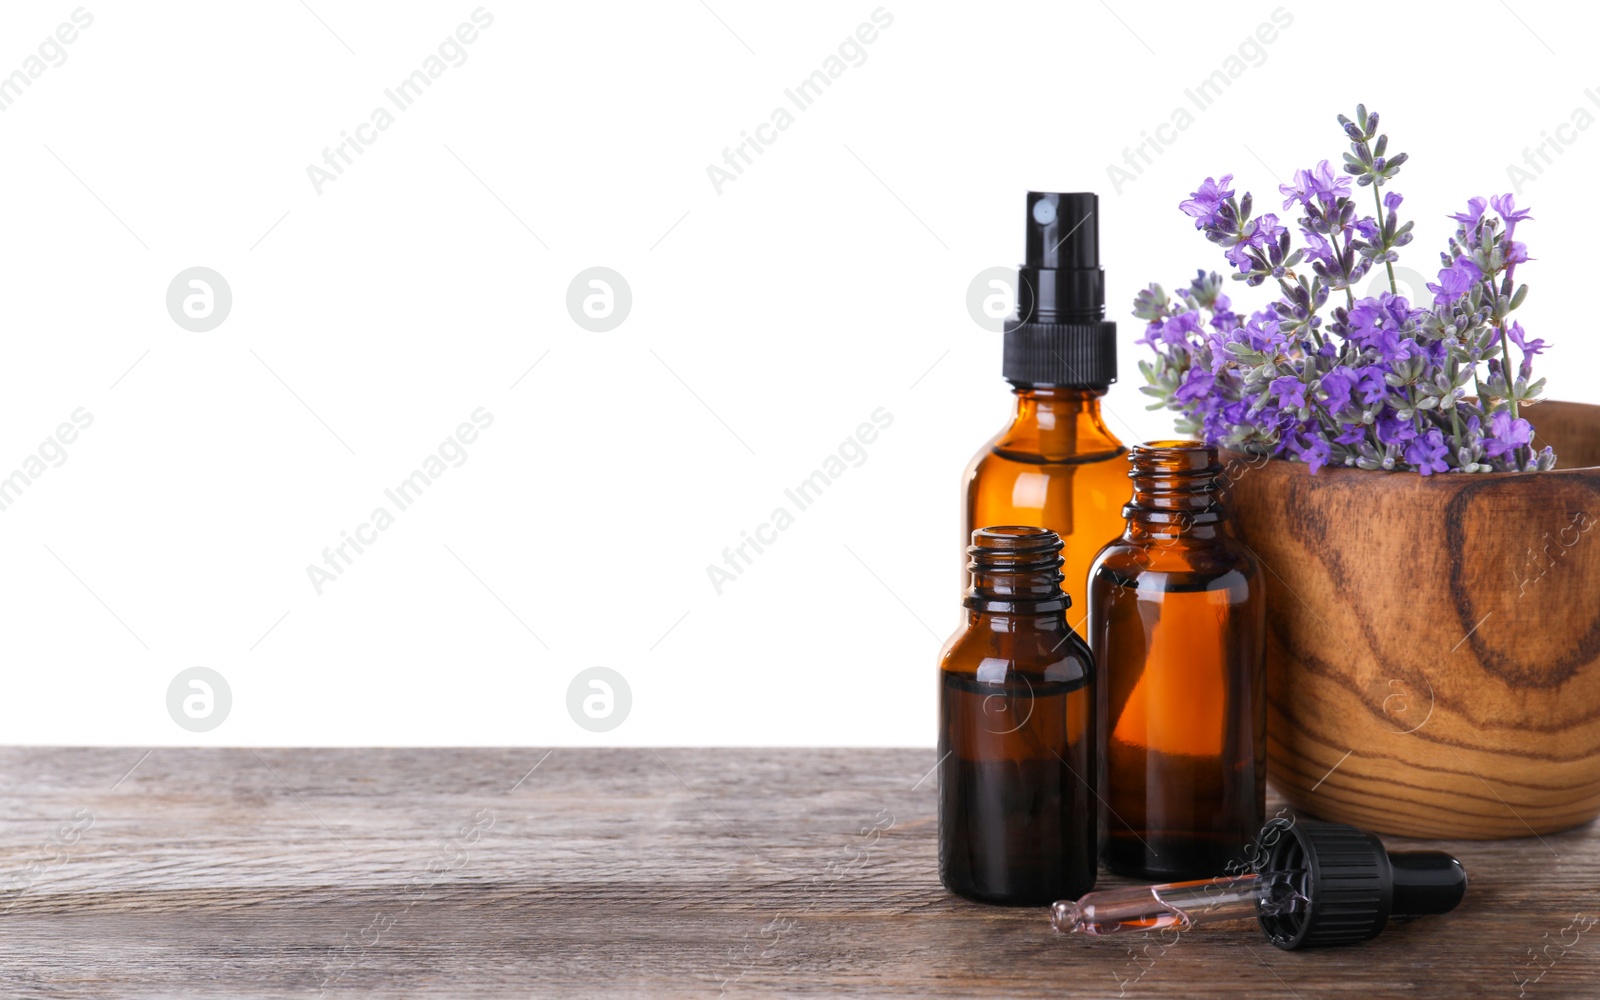 Photo of Bottles of essential oil and bowl with lavender flowers on wooden table against white background